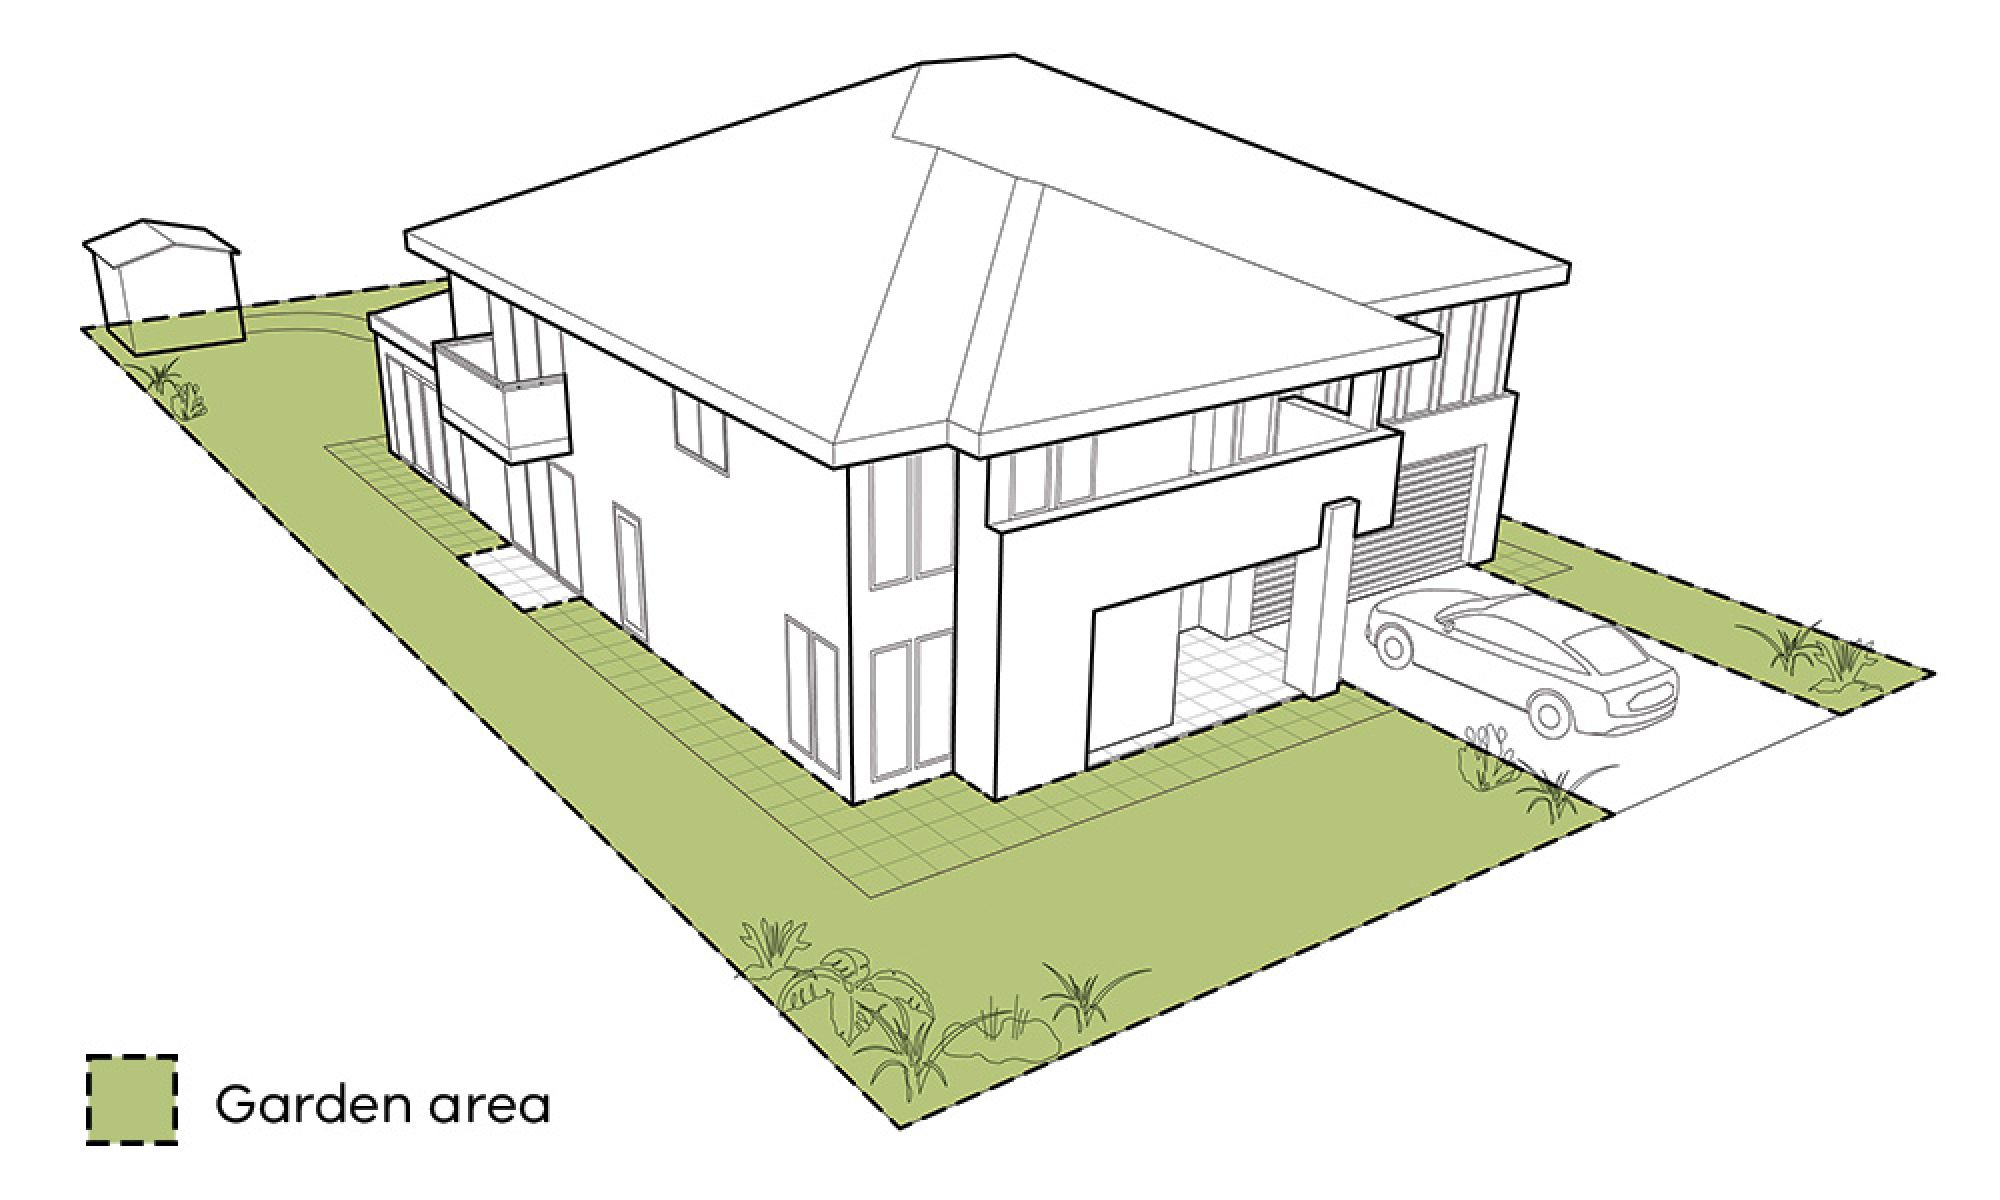 Diagram of front view of typical single dwelling